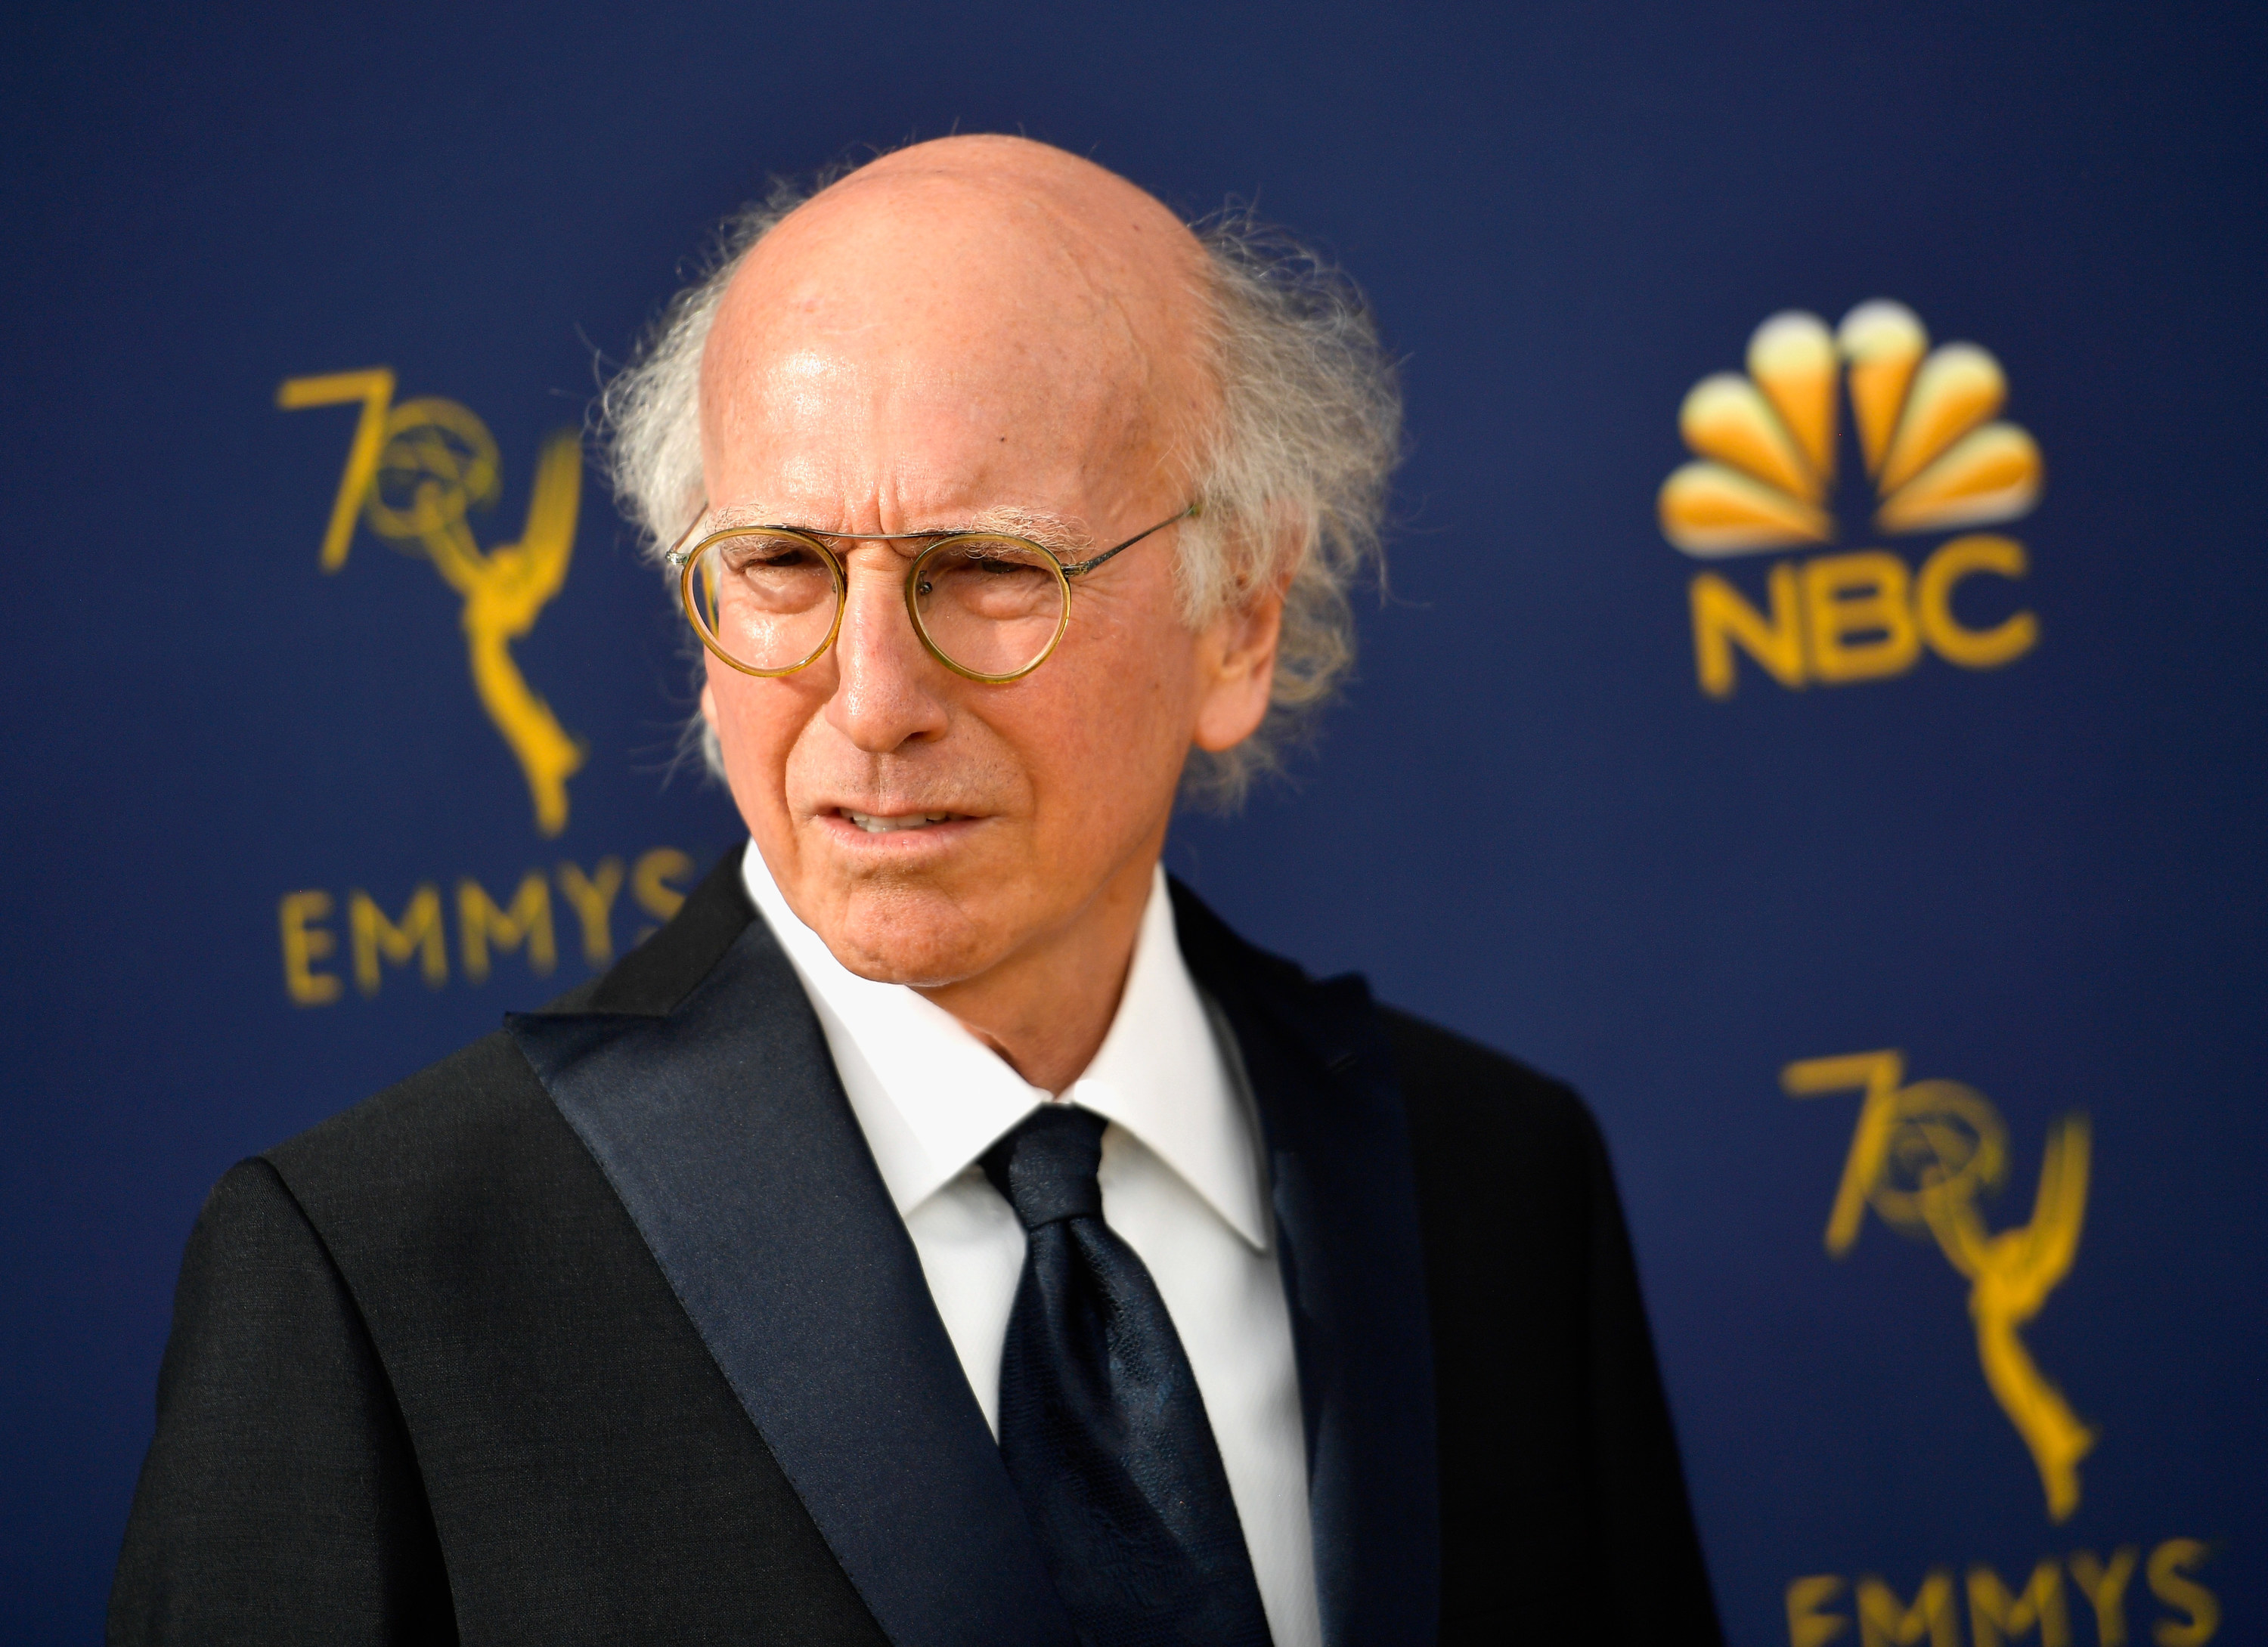 larry david giving a confused look with his signature grey hair parted in the middle